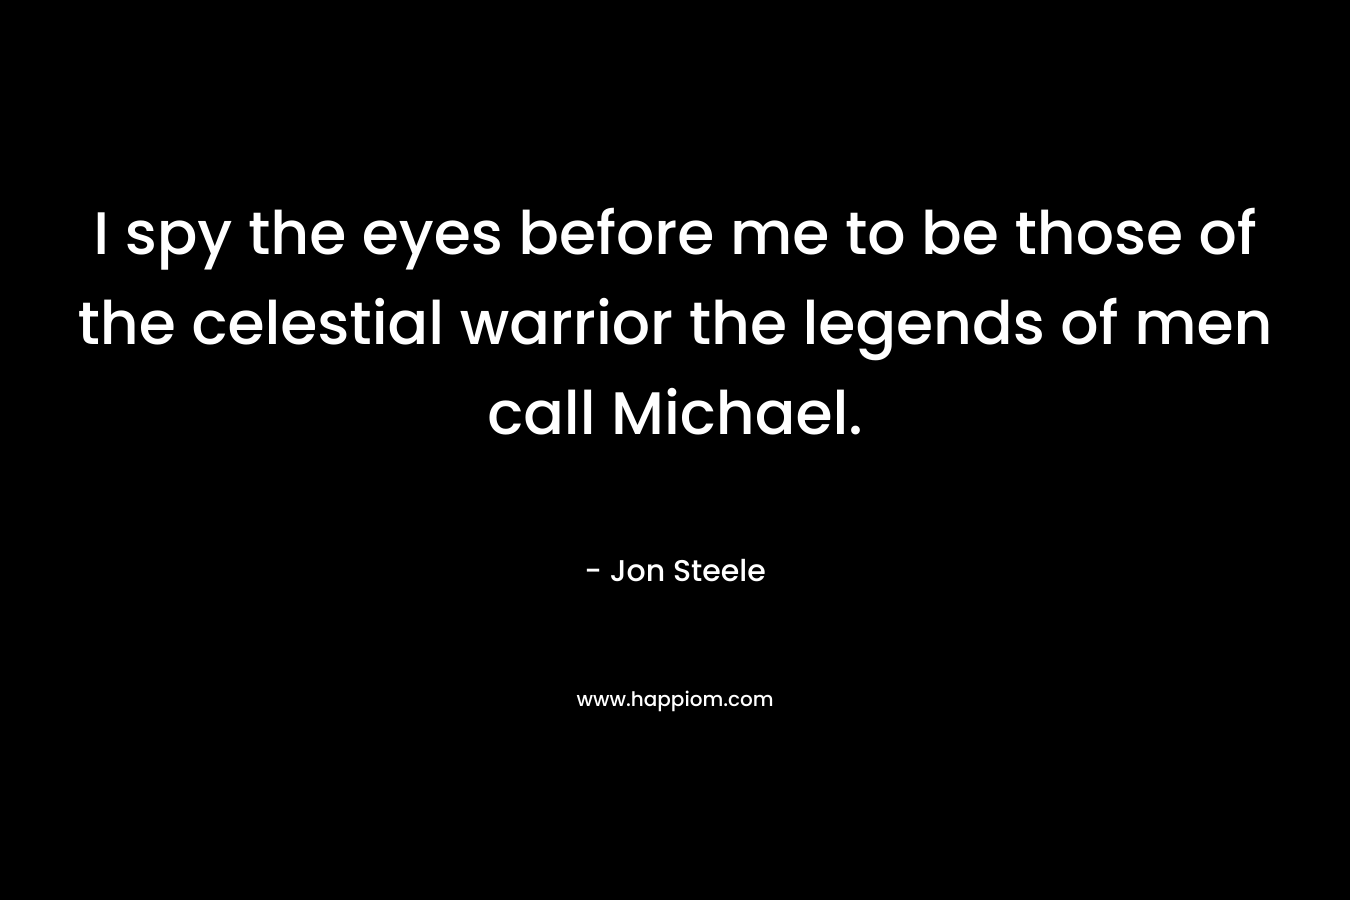 I spy the eyes before me to be those of the celestial warrior the legends of men call Michael. – Jon Steele